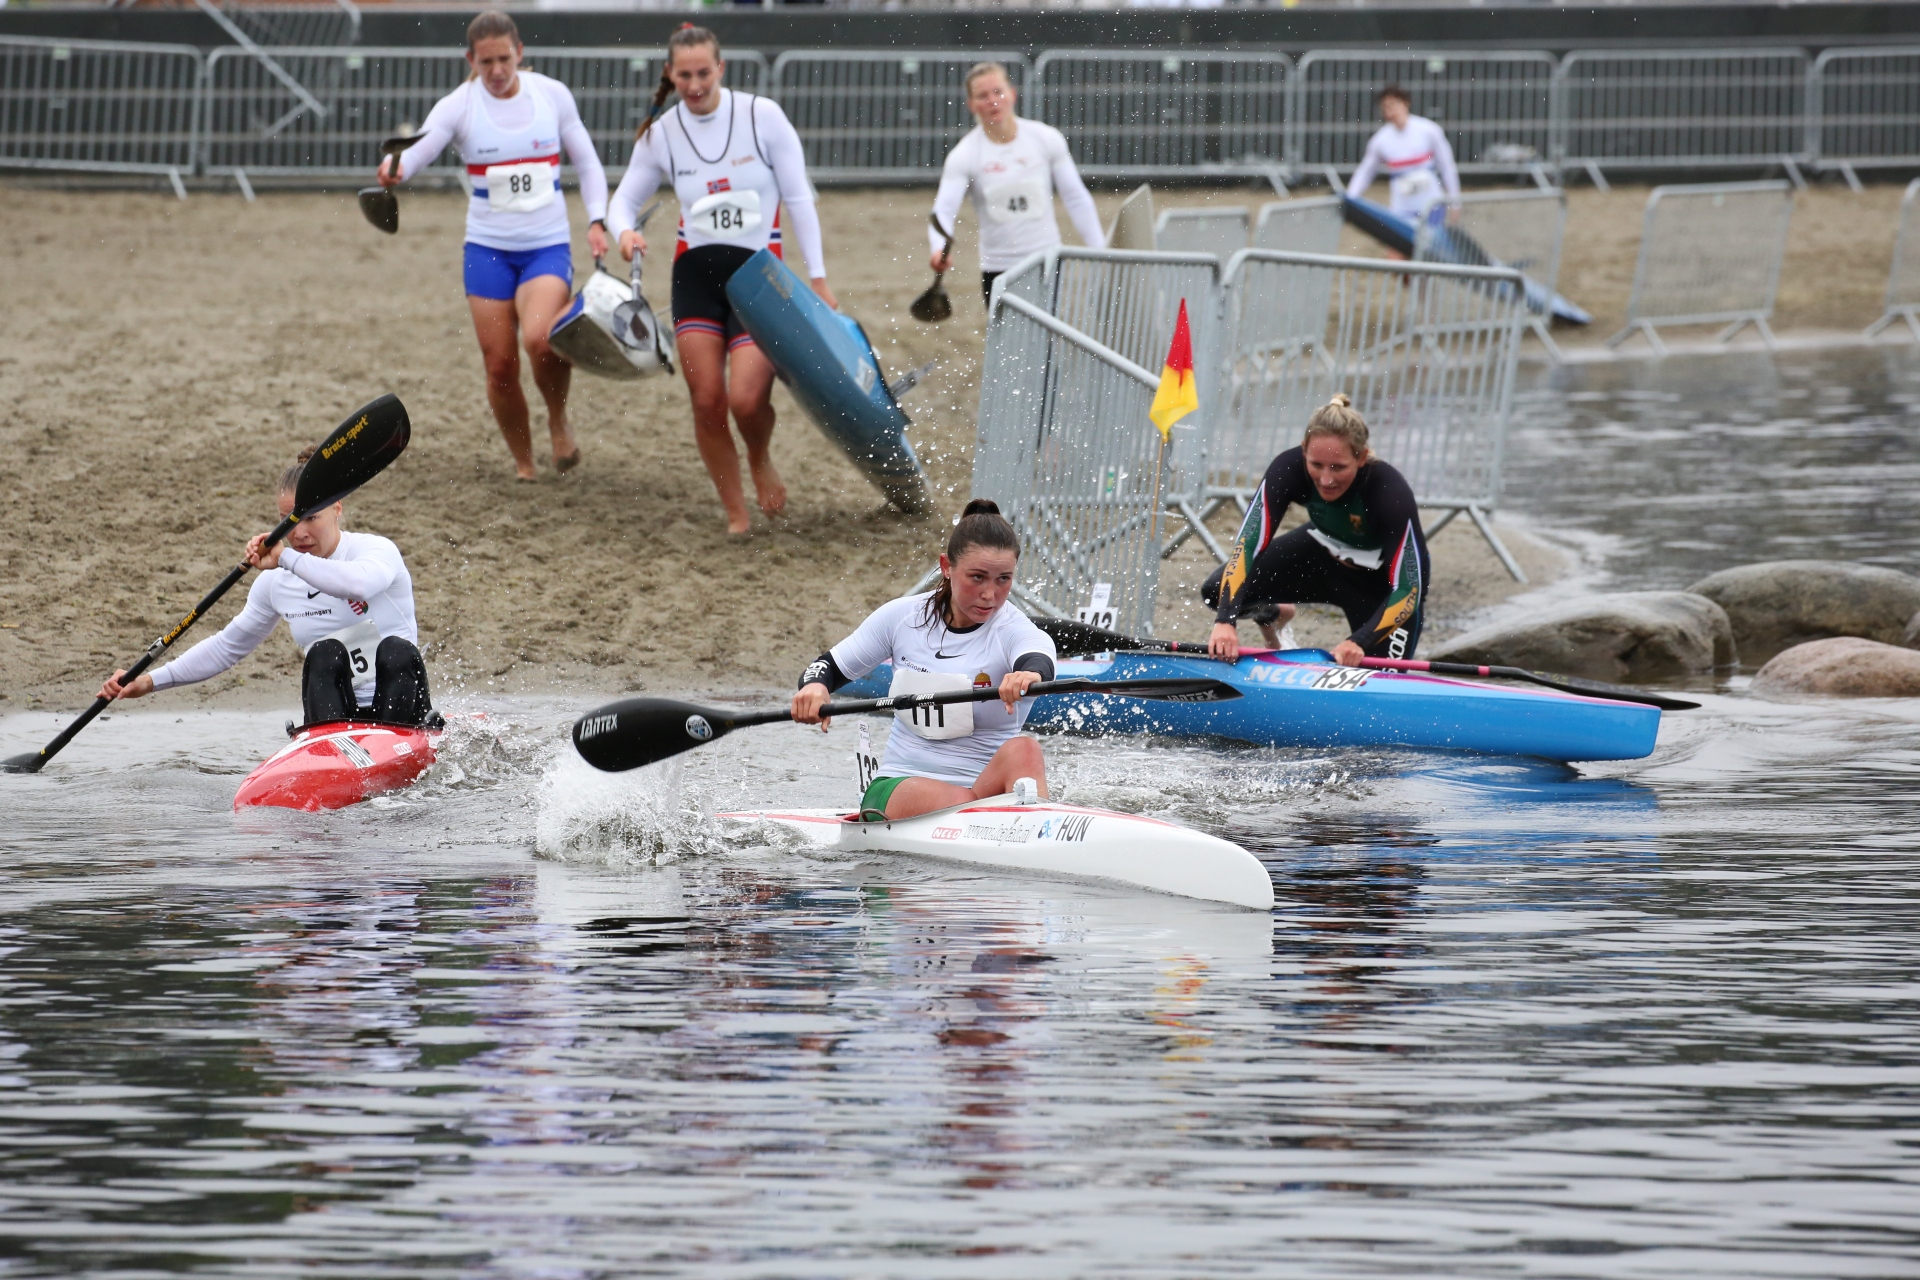 Thrills and spills on opening day of canoe marathon world cup ICF